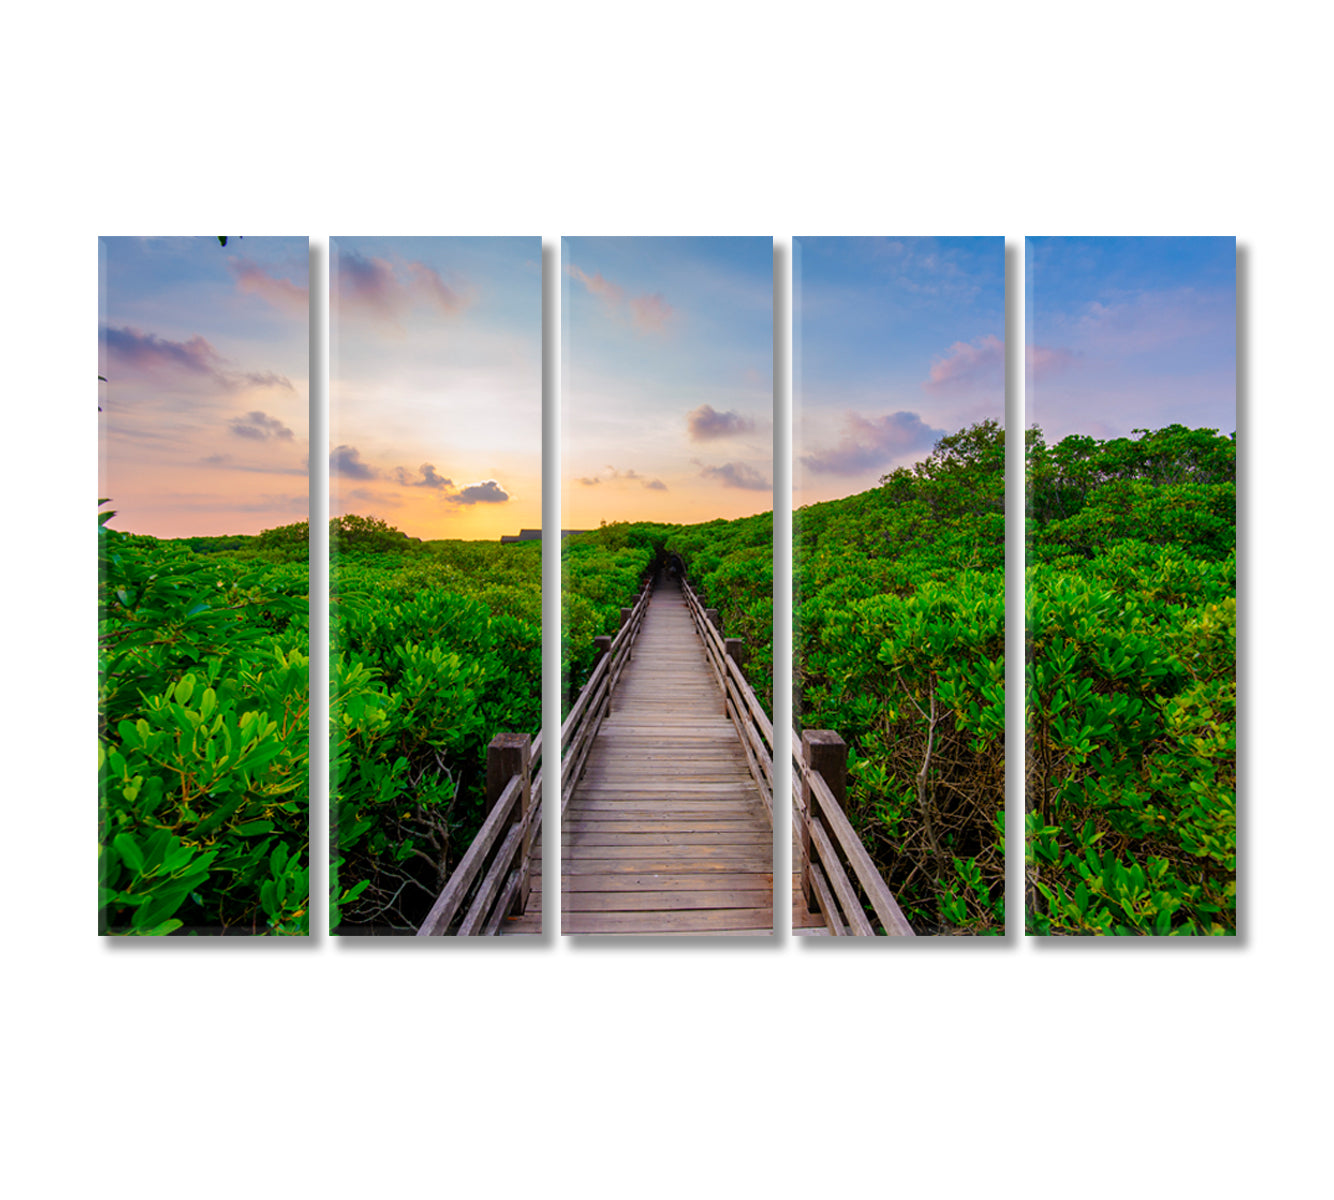 Mangrove Forest with Wood Walkway Canvas Print-Canvas Print-CetArt-5 Panels-36x24 inches-CetArt